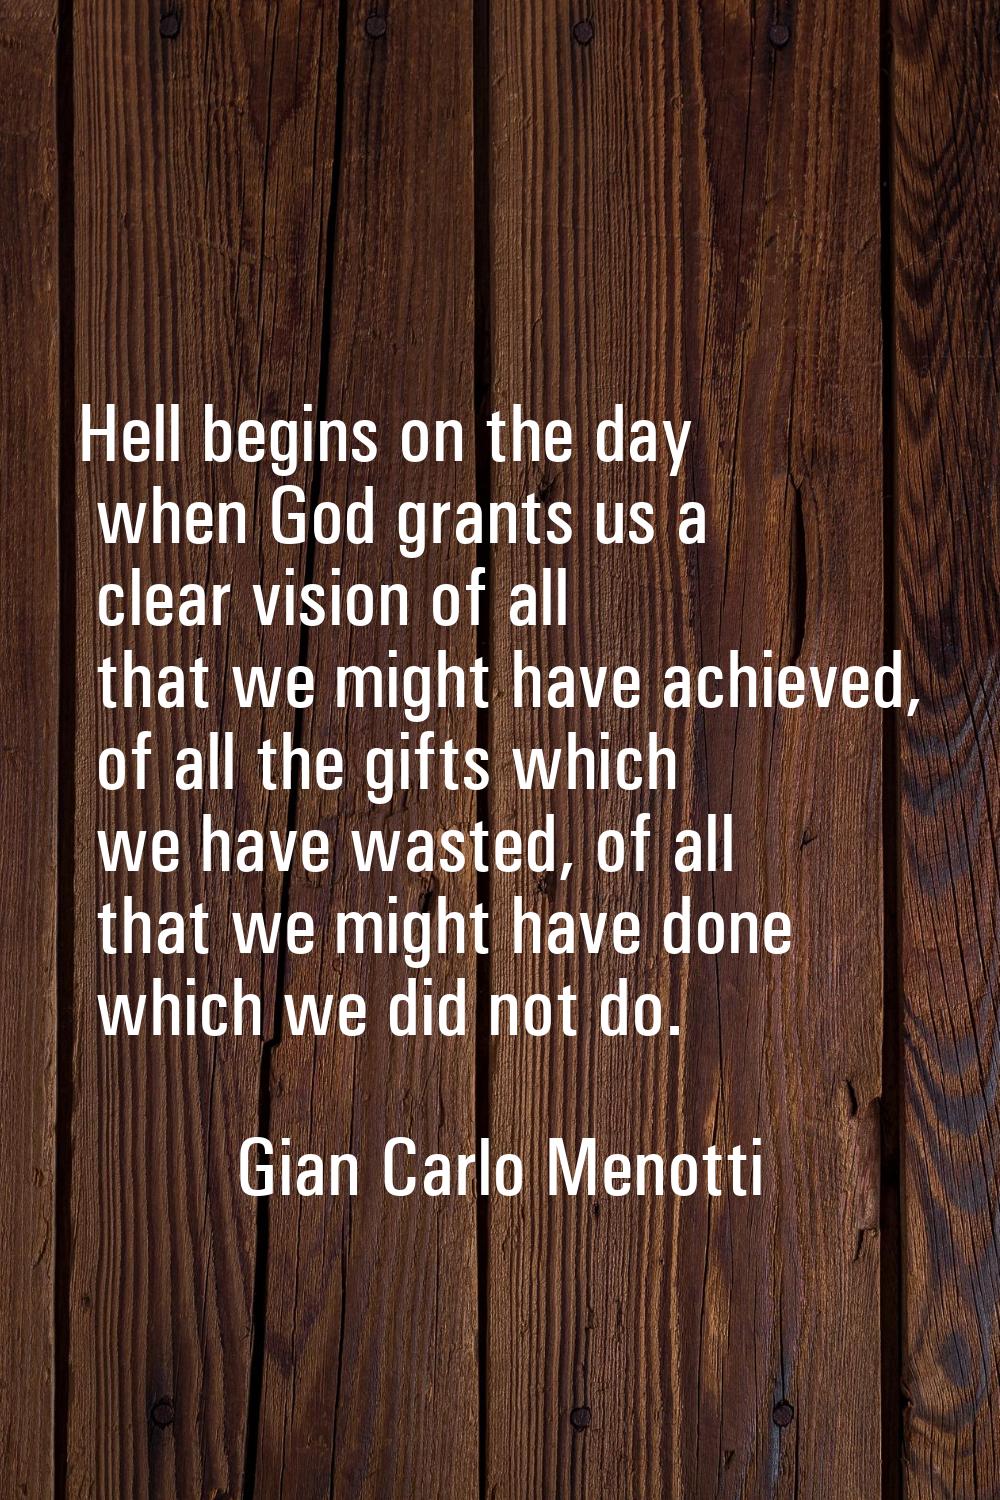 Hell begins on the day when God grants us a clear vision of all that we might have achieved, of all